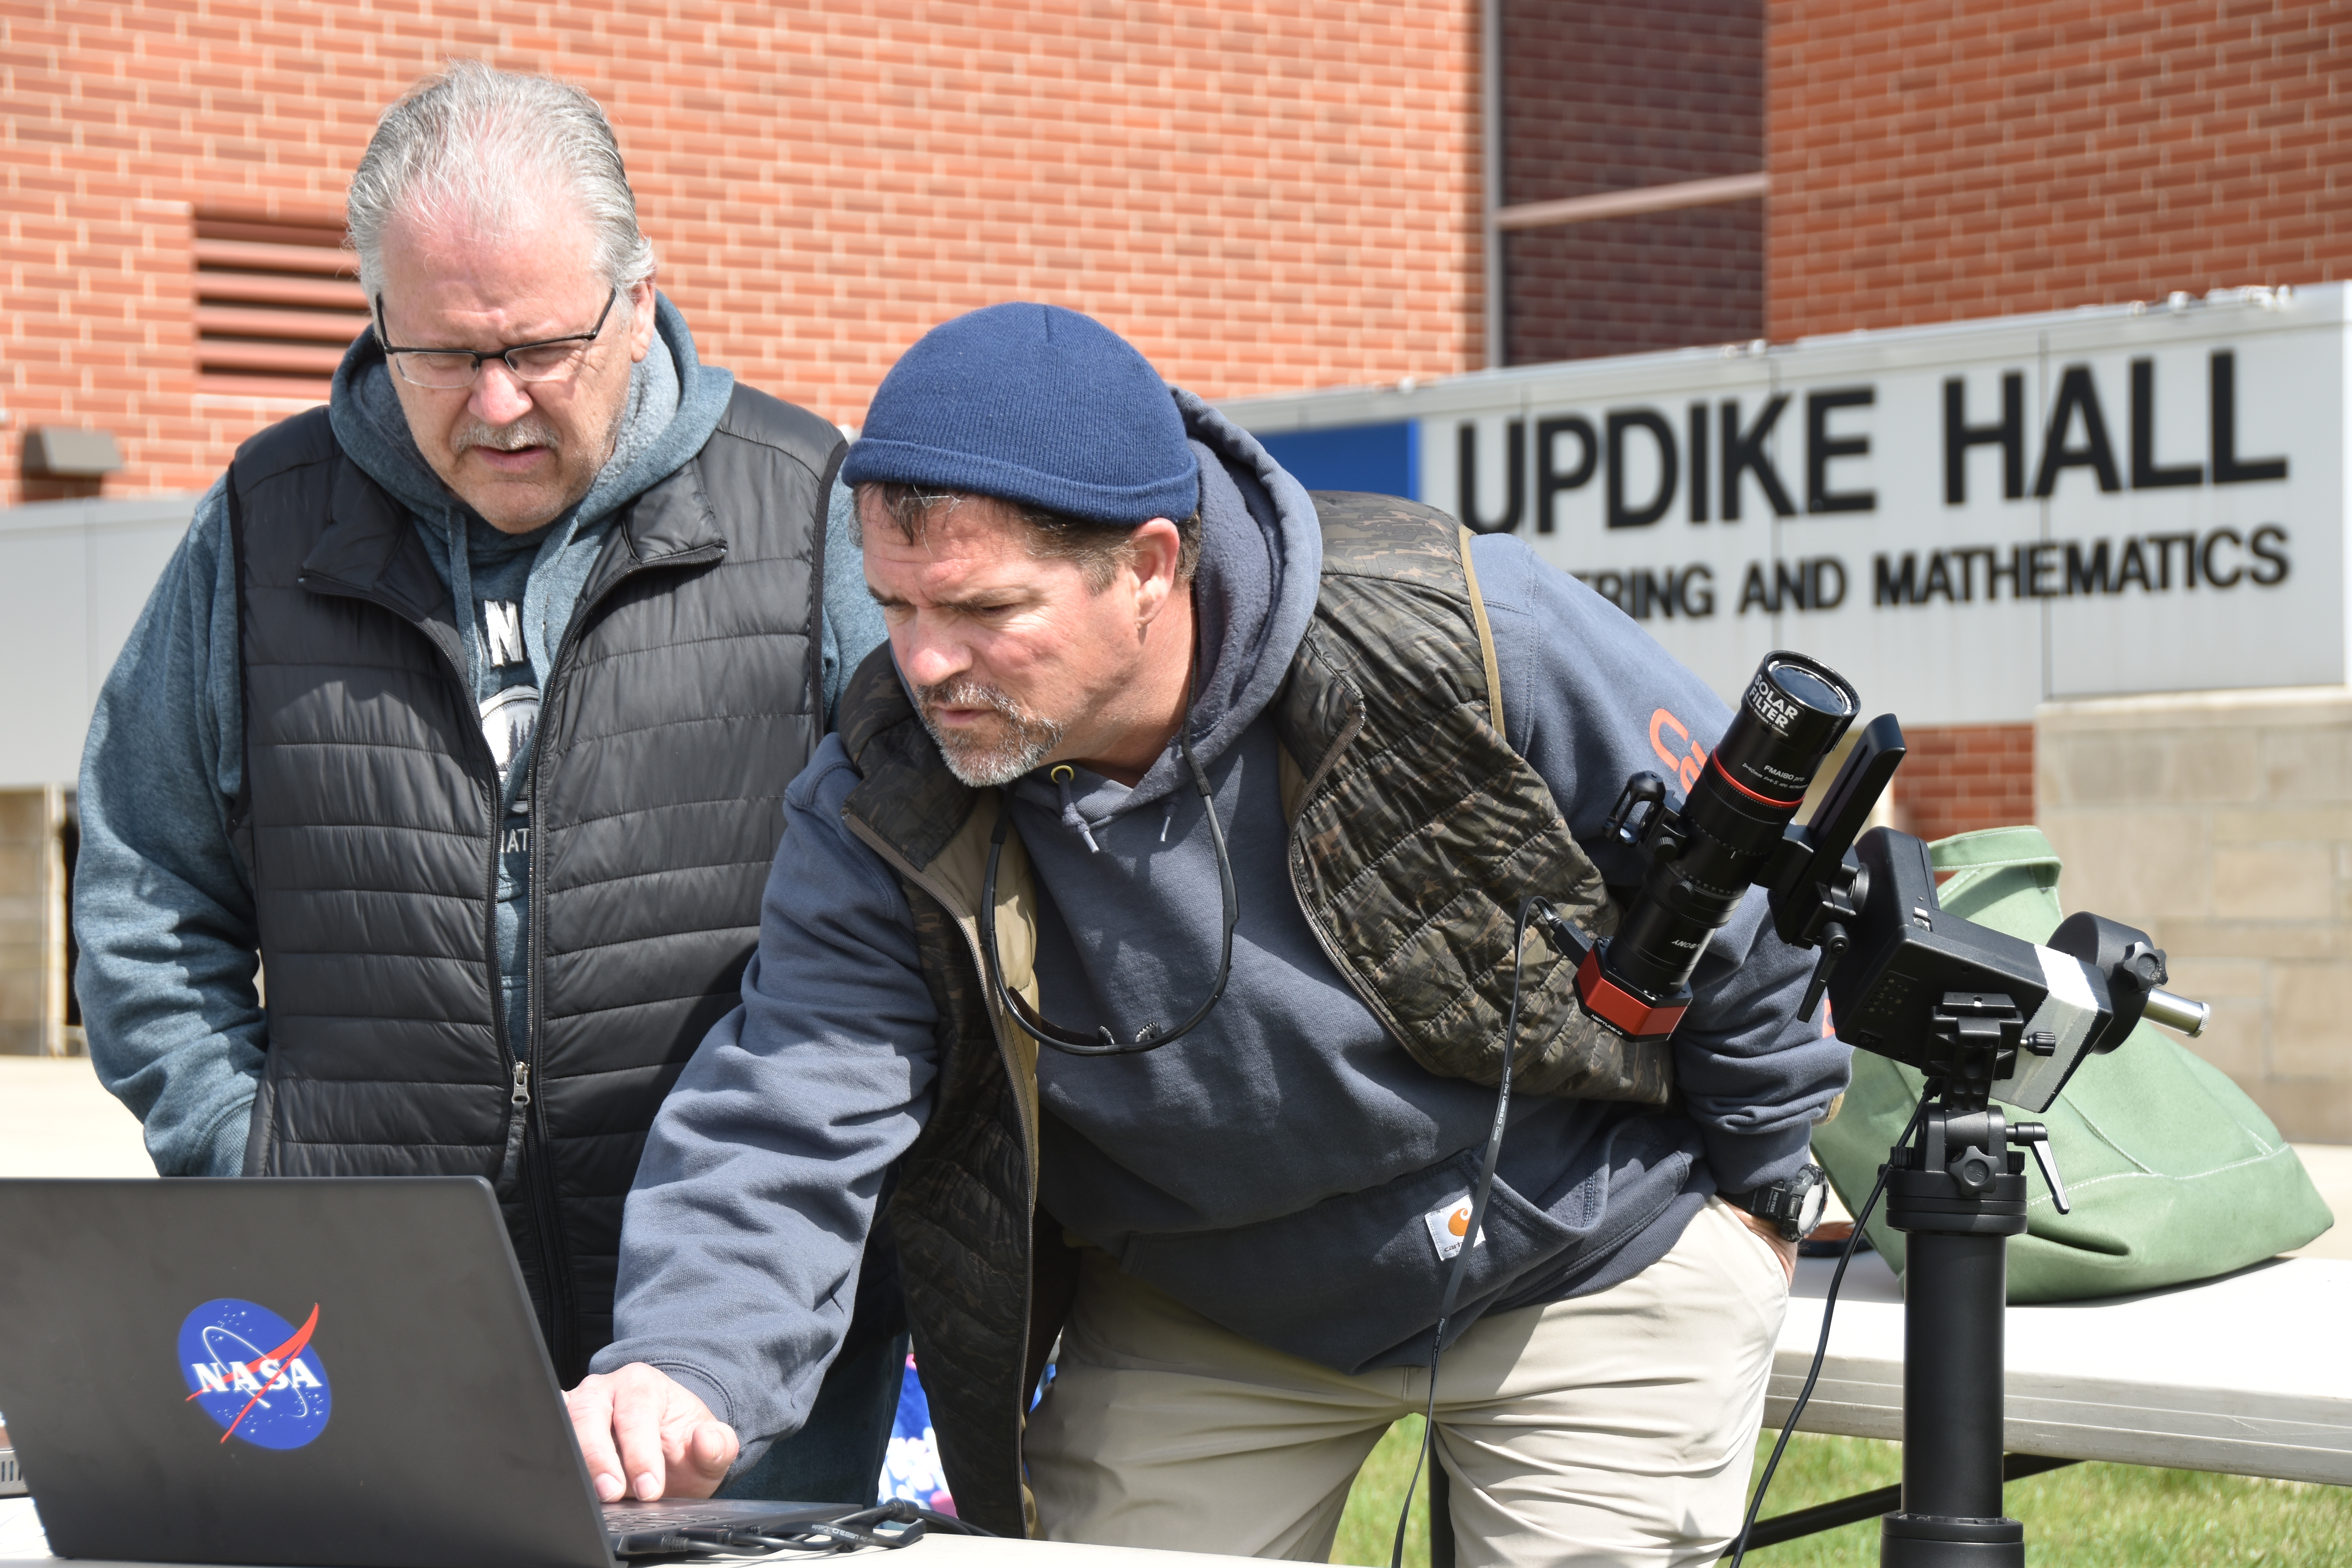 Two males looking at a laptop screen outside Updike Hall. The laptop has a NASA sticker on it. 